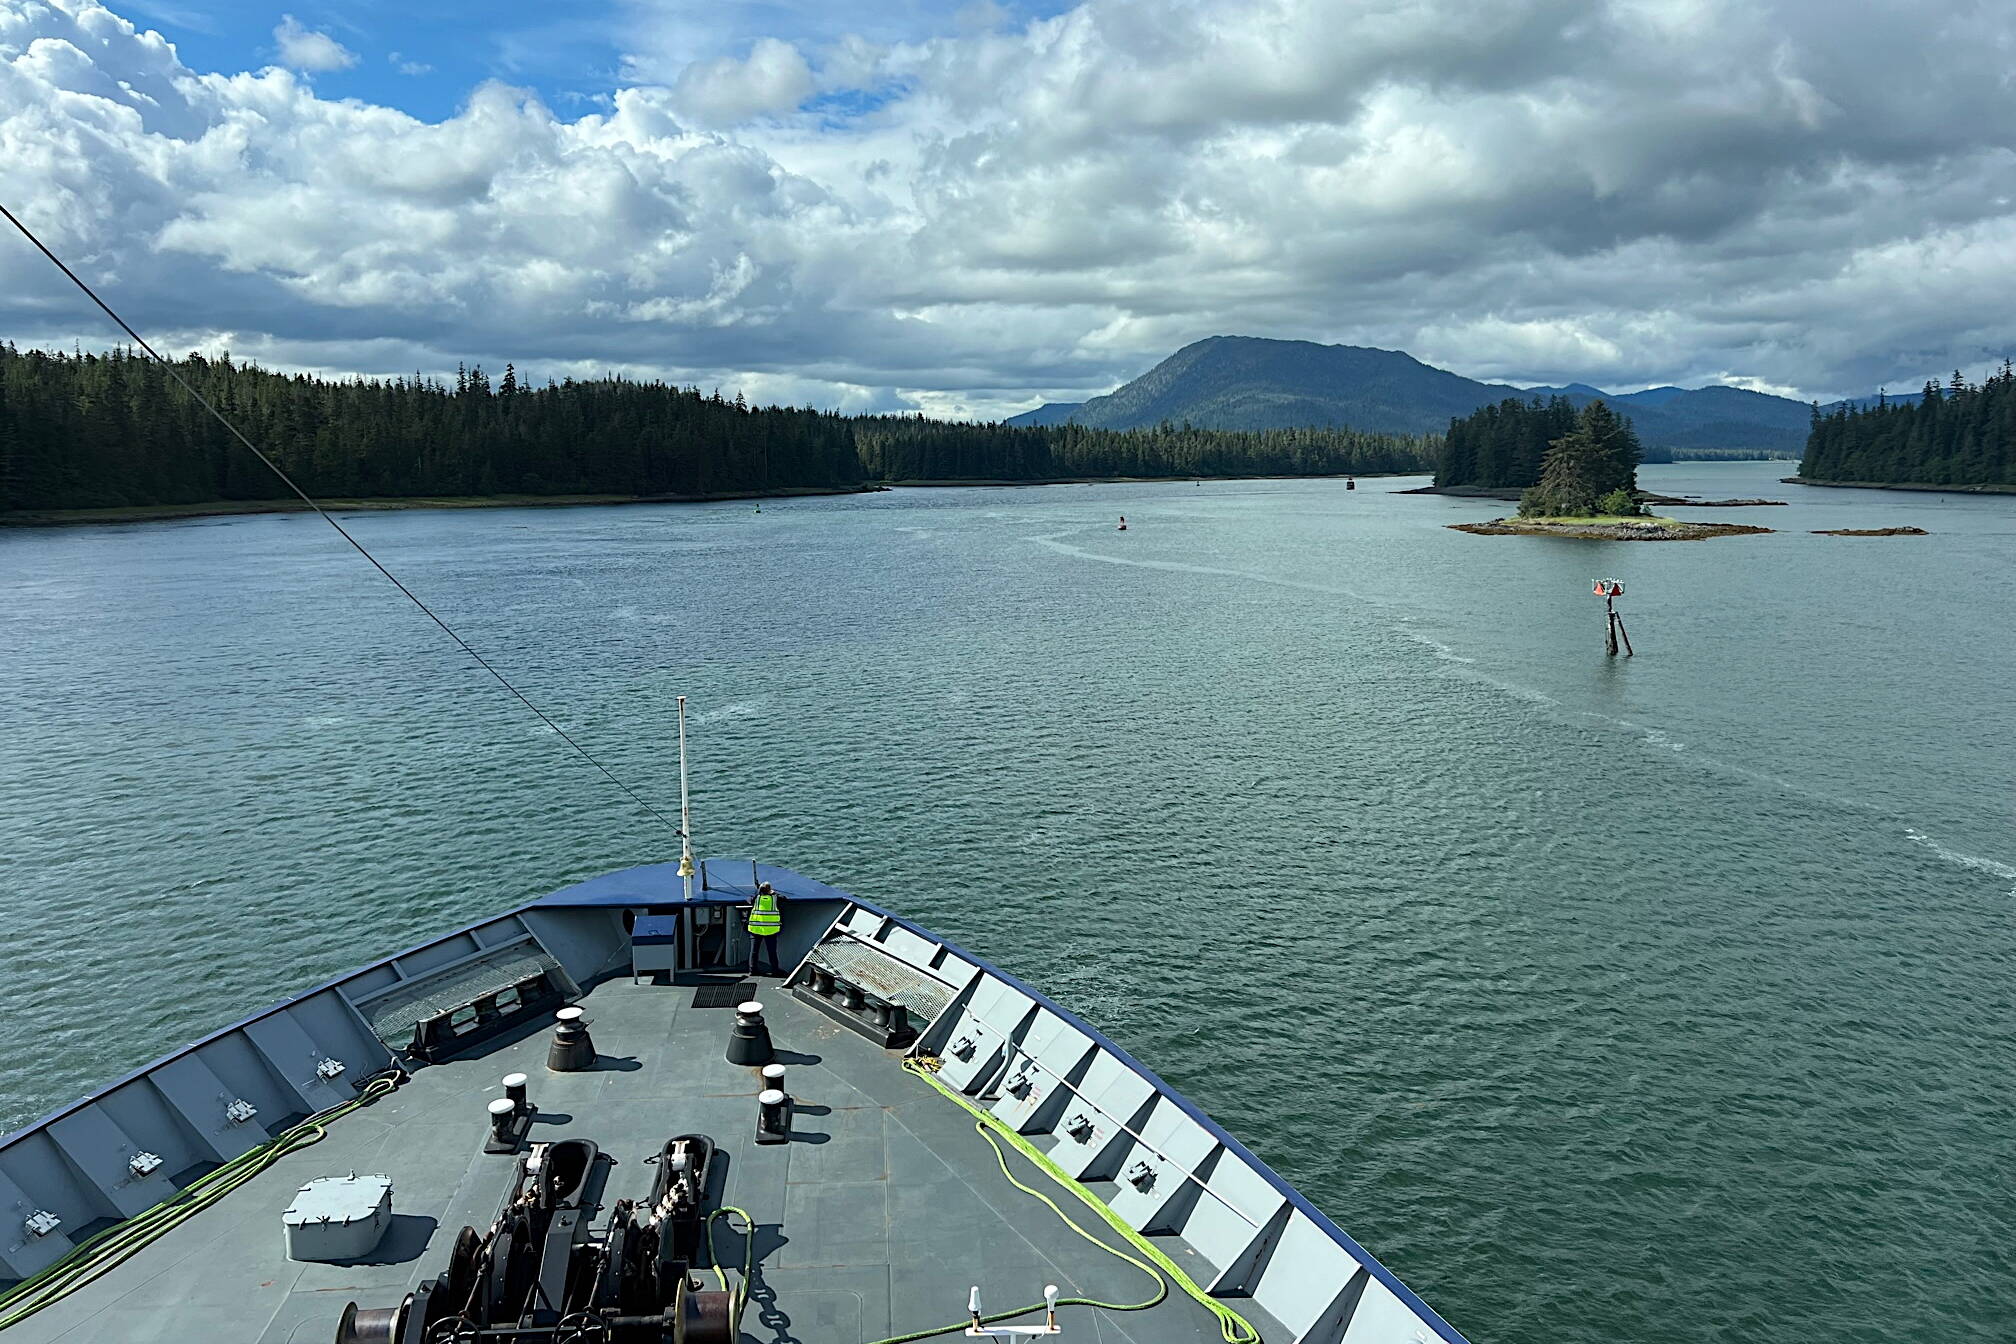 Ordinary Seaman Ann Griswold stands lookout on the foredeck of Columbia as it makes its way through the Wrangell Narrows. (Meredith Jordan / Juneau Empire)